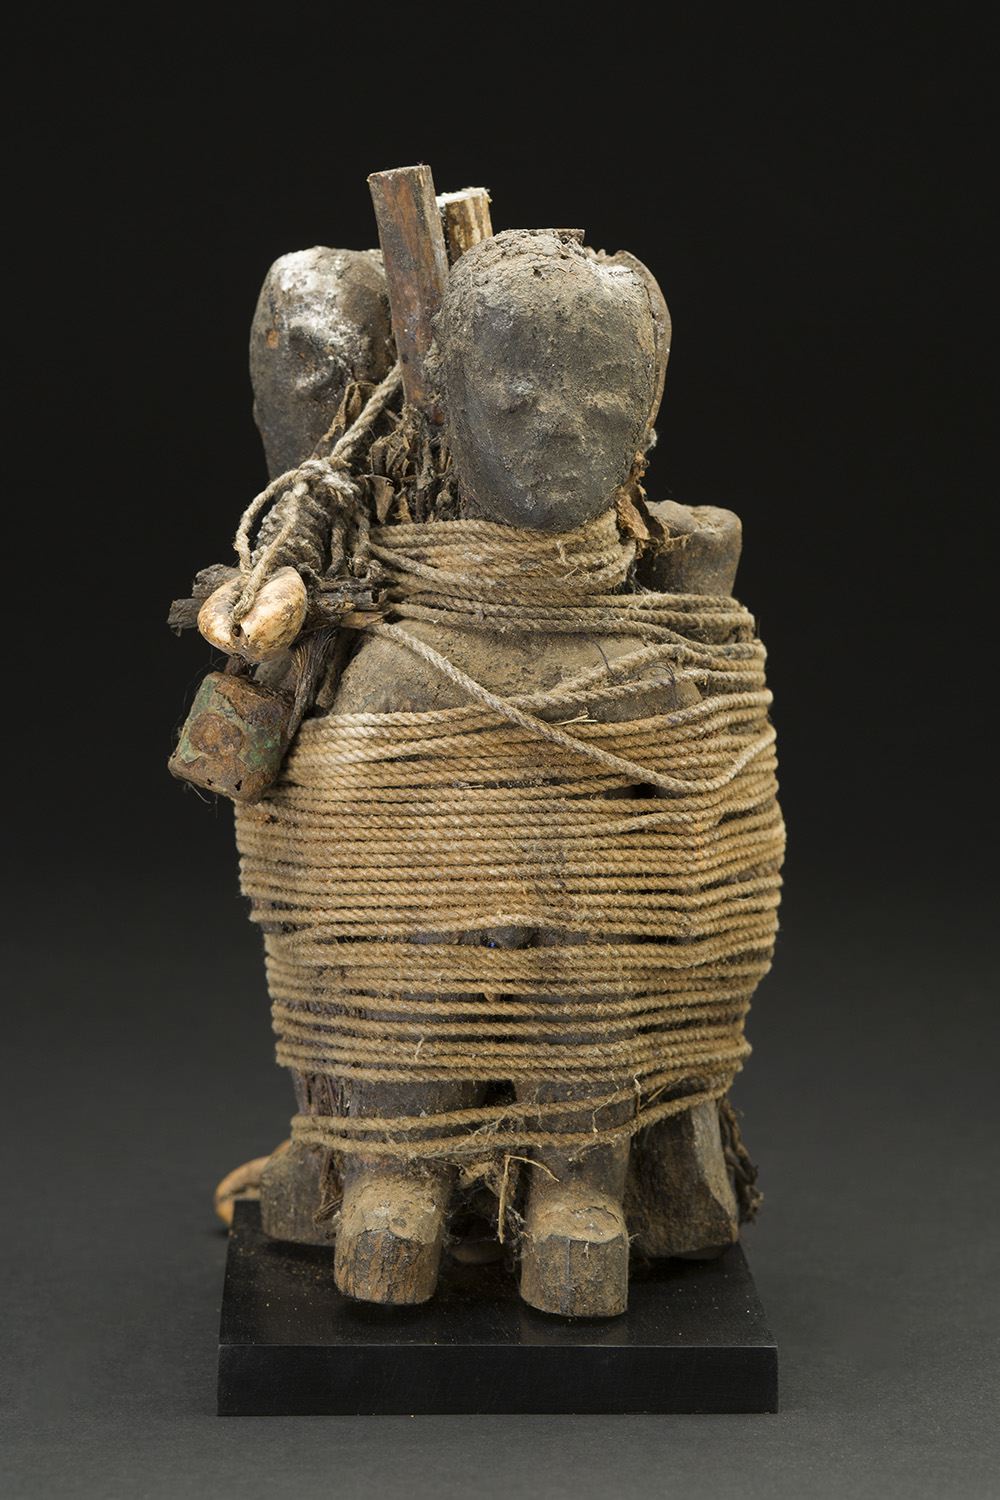   Africa    Vodun Sculpture - Ewe People - Togo  , Mid. 20th C.&nbsp; Wood, string, bone, shells, nails, padlocks, pigment, iron, feathers, patina, and sacrificial materials 8 x 5.25 x 4 inches 20.3 x 13.3 x 10.2 cm Af 317 